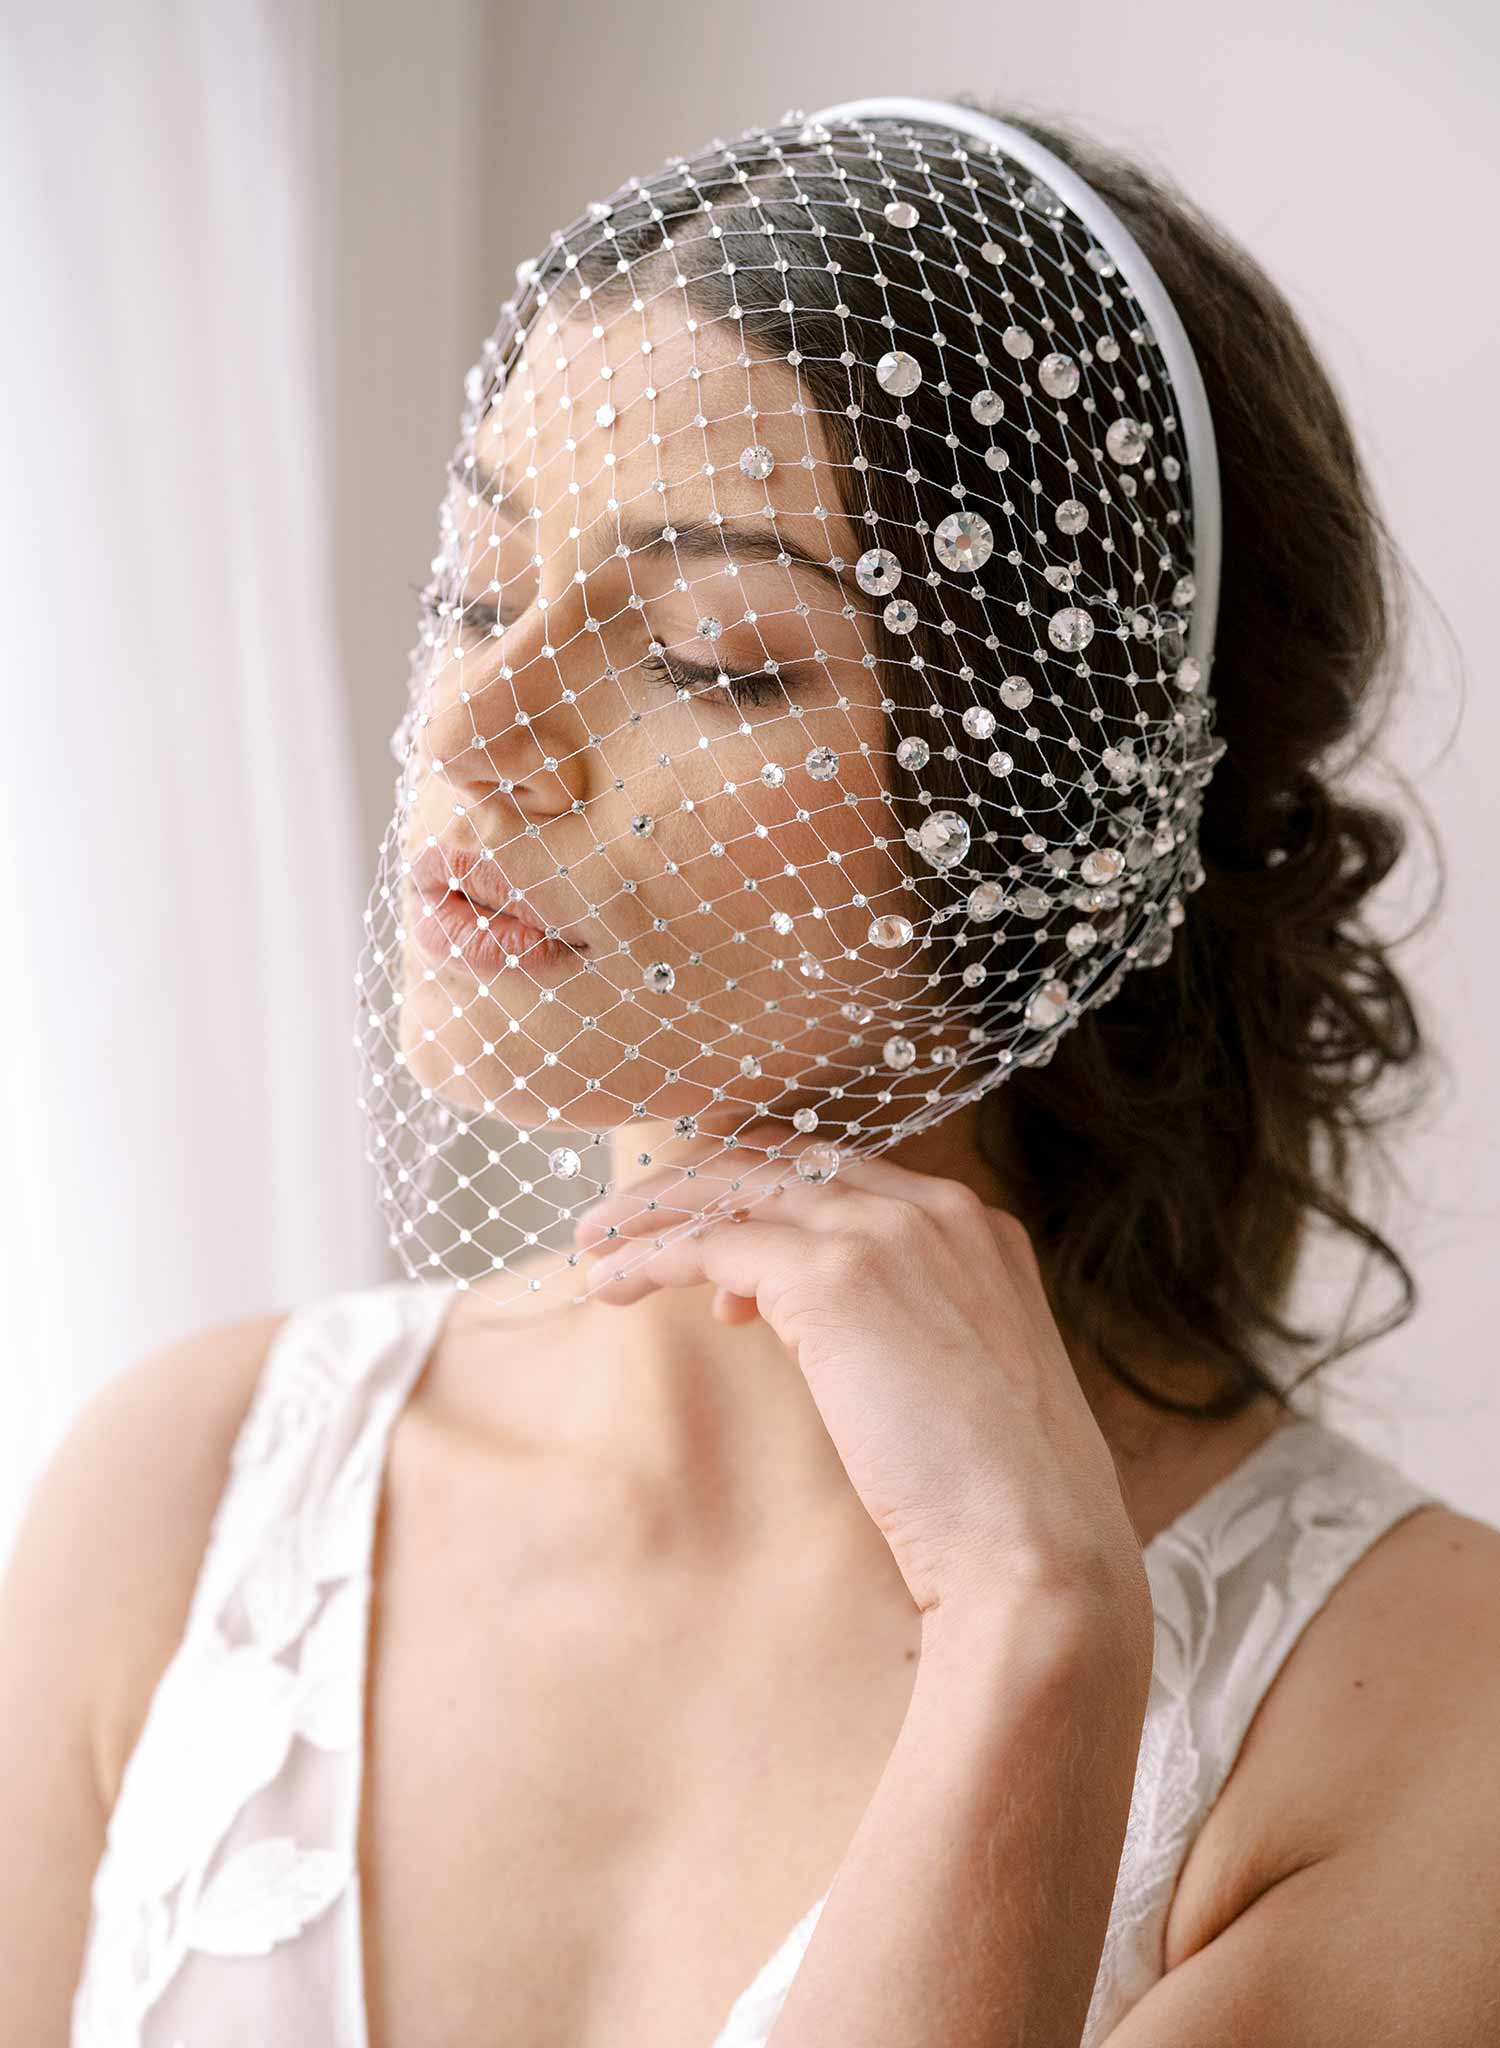 Birdcage veil with thick white pearl beaded headband for fashion